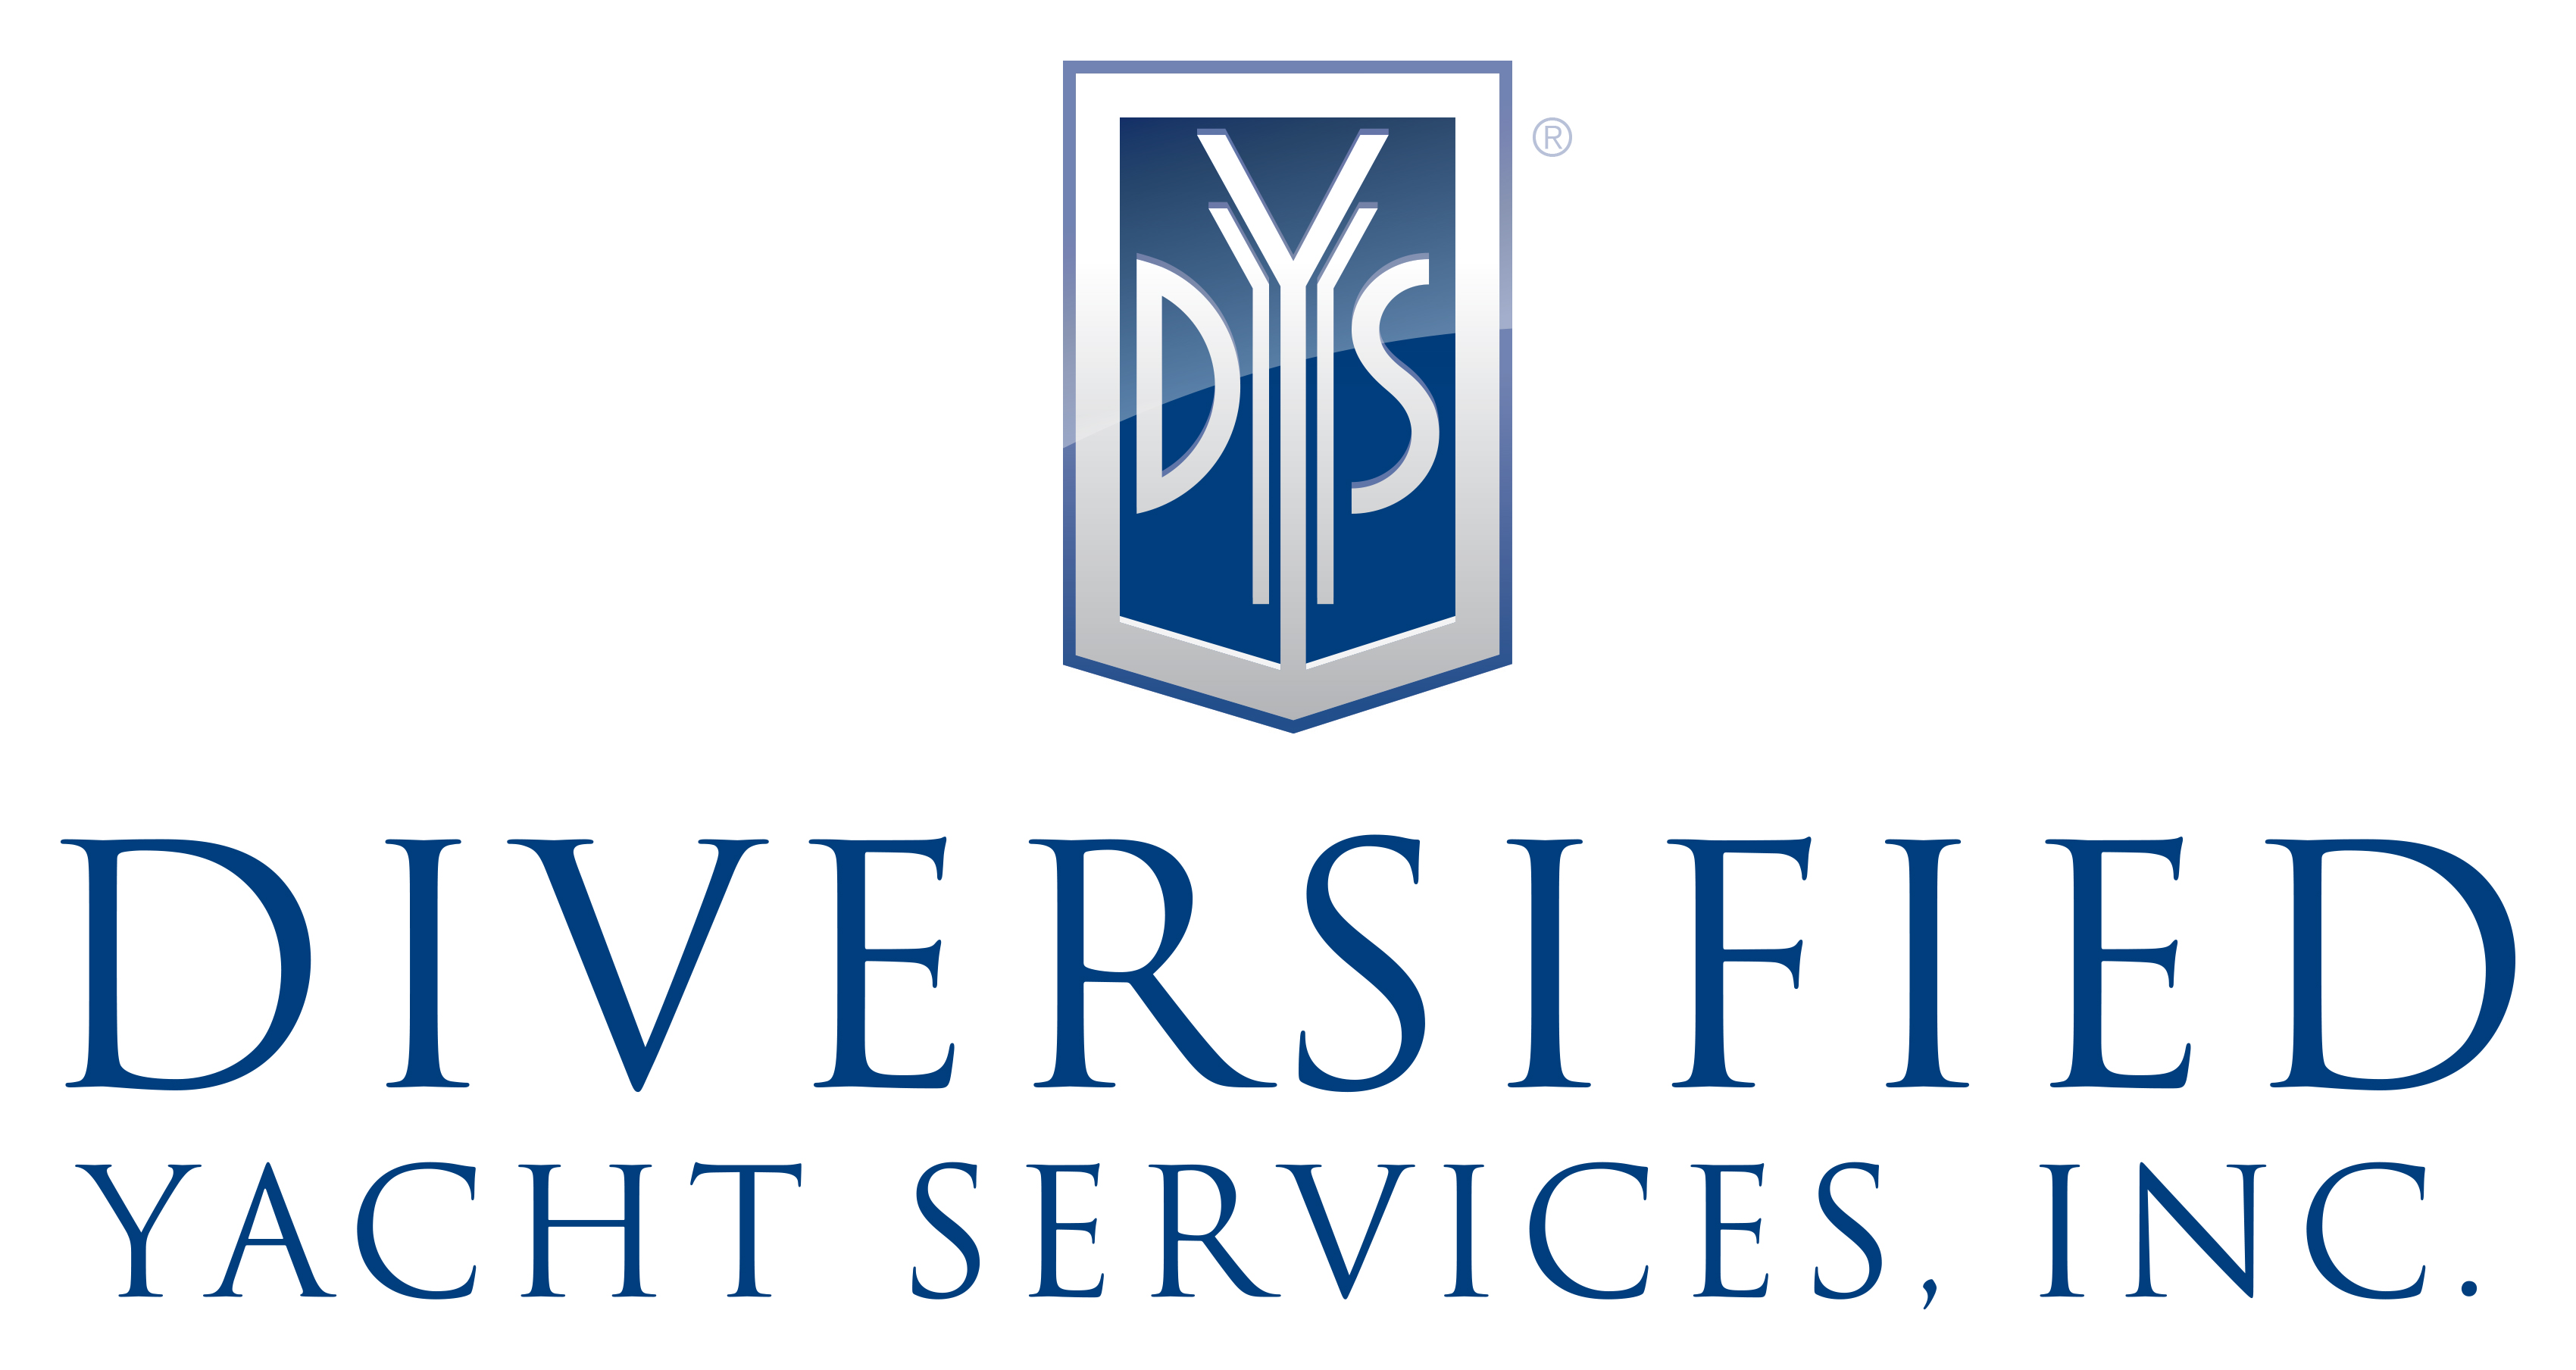 DIVERSIFIED YACHT SERVICES